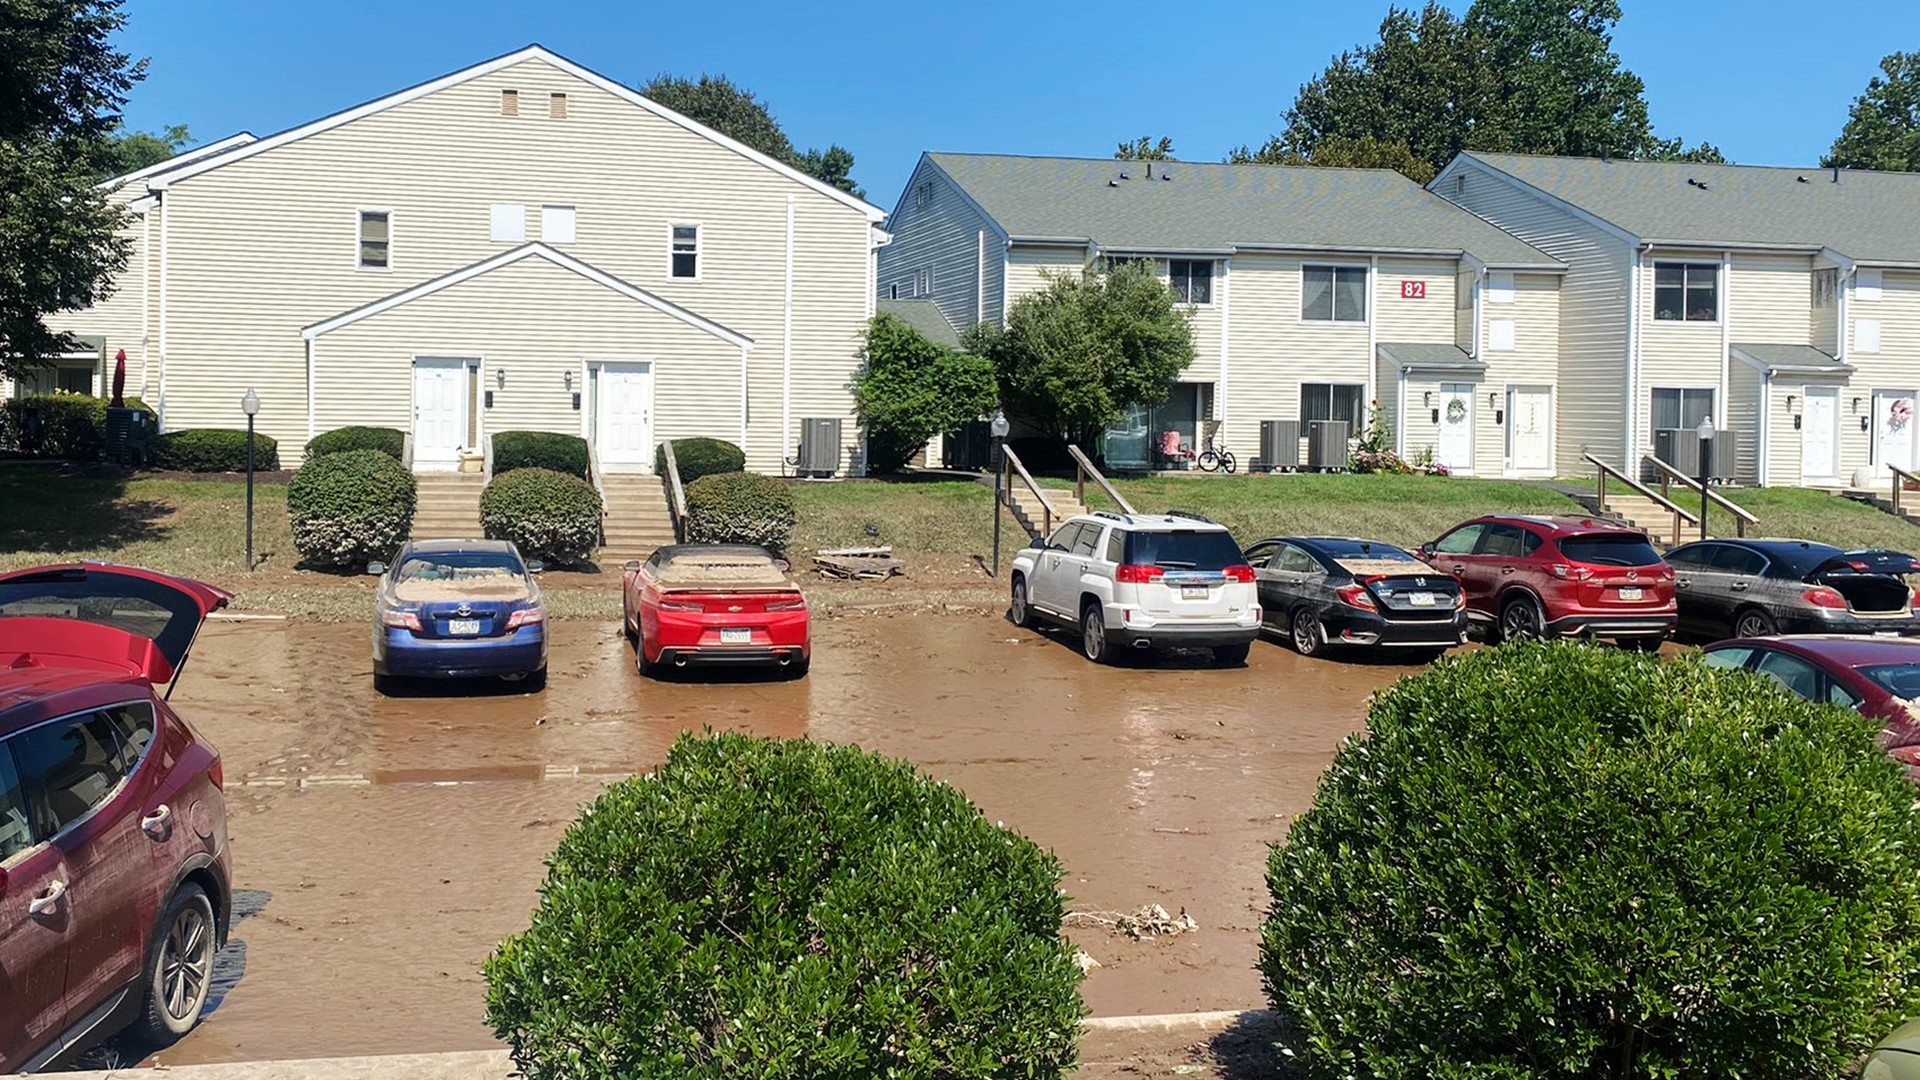 Most of the water that flooded the parking lot of an apartment complex in Monroe County has receded. However, lots of mud and damaged vehicles remain.